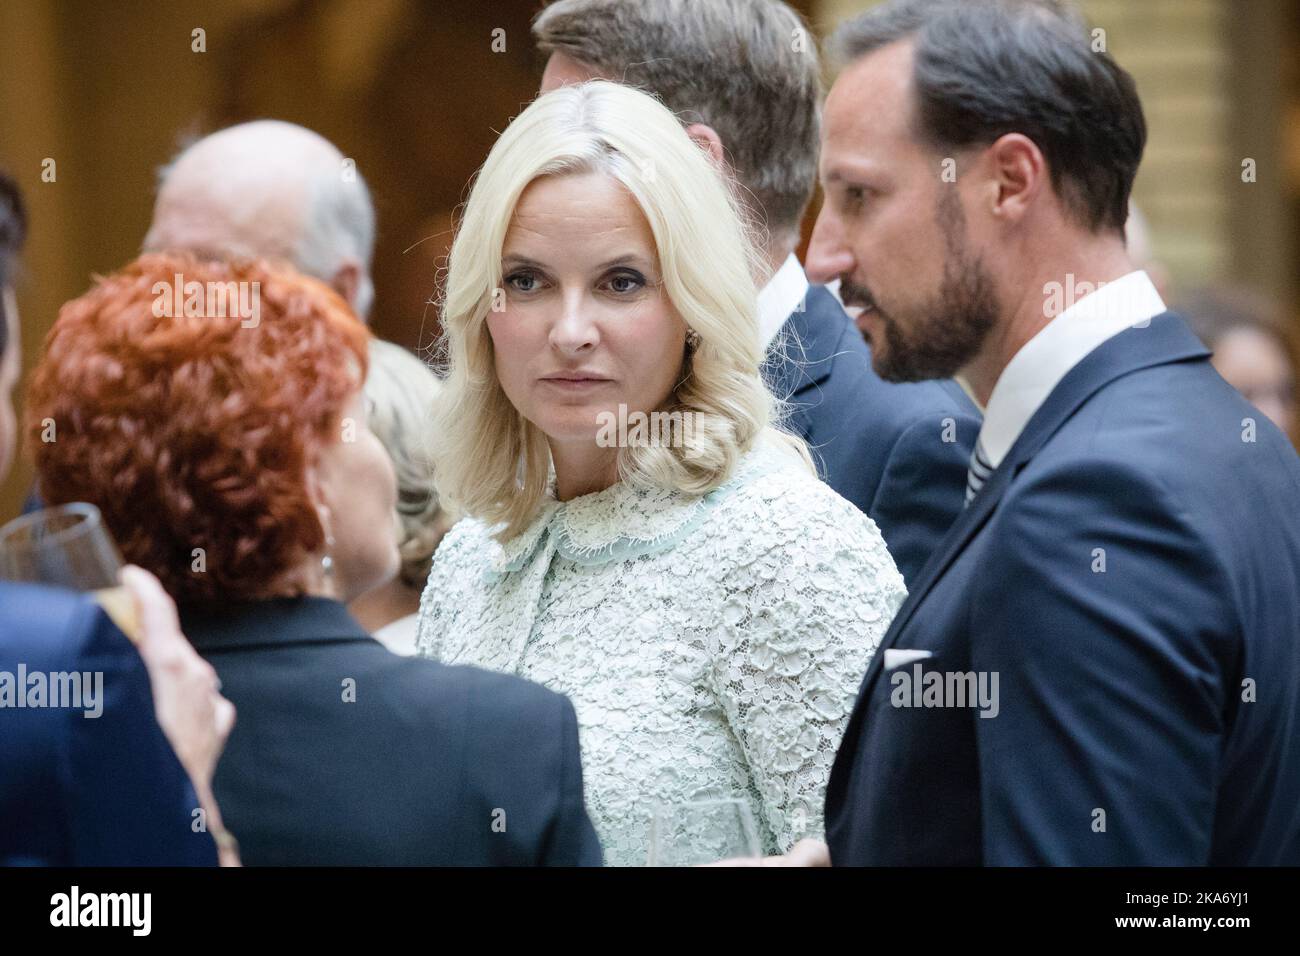 Oslo, Norway 20170918. Crown Princess Mette-Marit and Crown Prince Haakon during the unveiling of the King and Queen's 80th anniversary gift from the Storting (Parliament) on Monday. The gift is a painting by Kira Wager called 'King Olav V's Oath for the Storting'. Photo: Audun Braastad / NTB scanpi Stock Photo